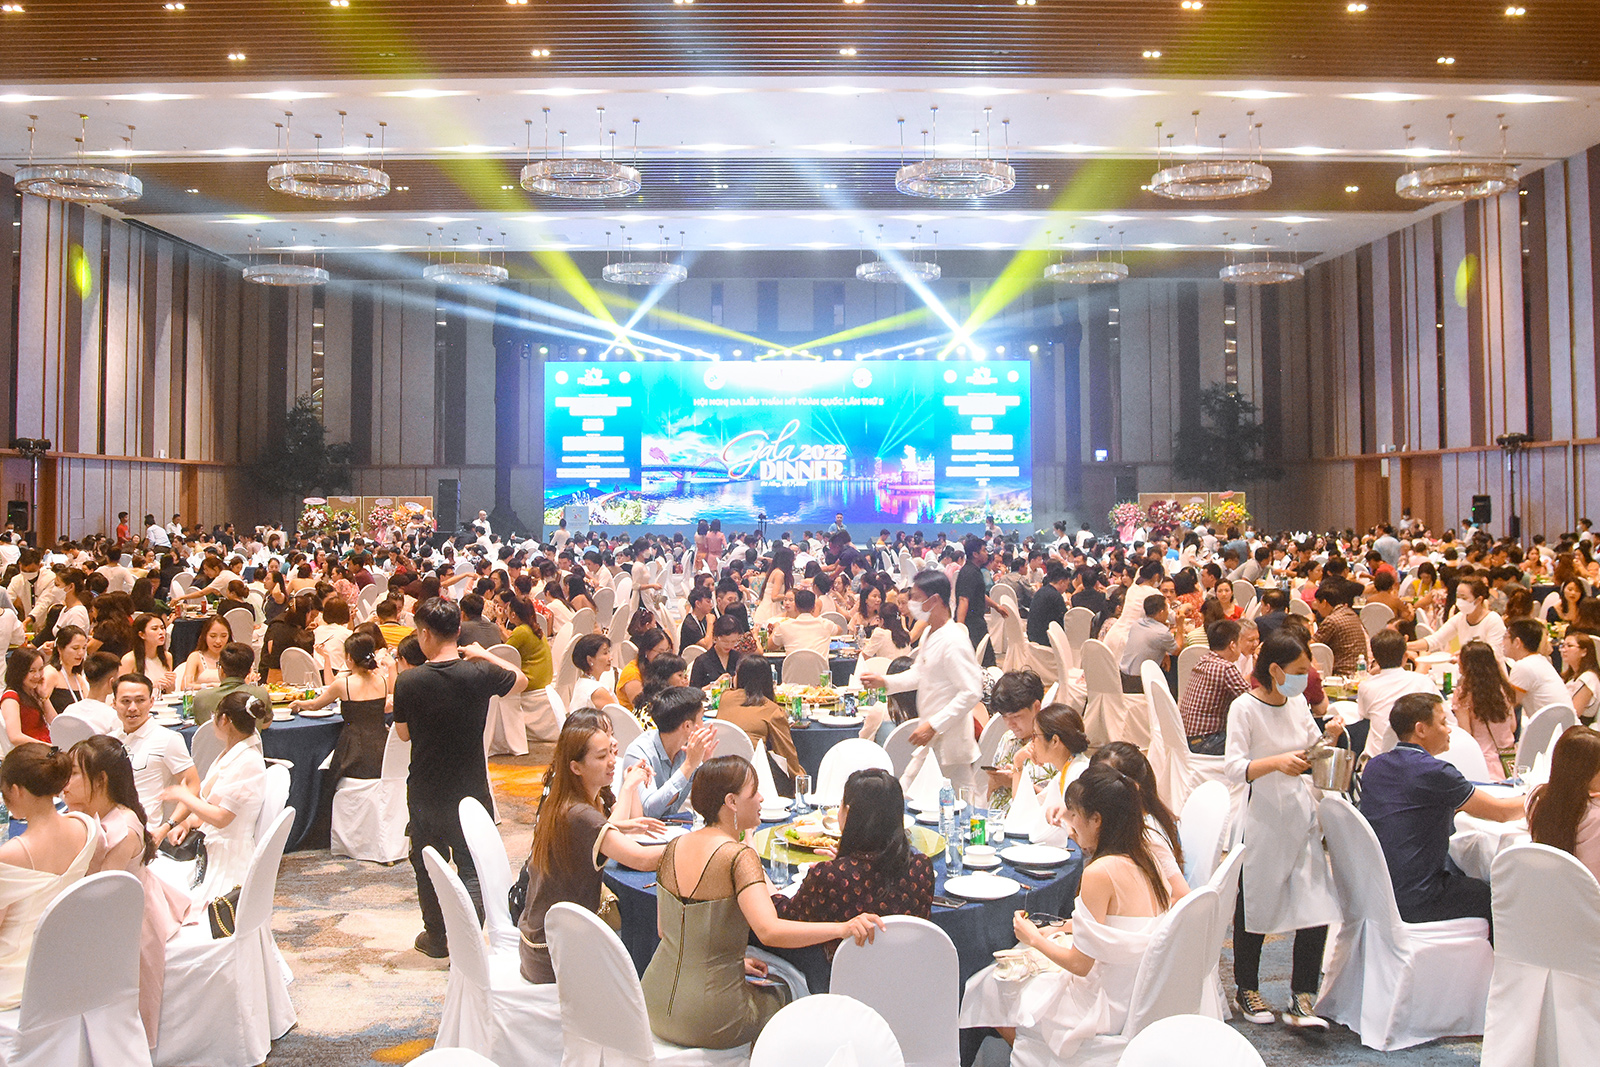 THE 5TH NATIONAL CONGRESS OF AESTHETIC DERMATOLOGY AT ARIYANA CONVENTION CENTRE DANANG